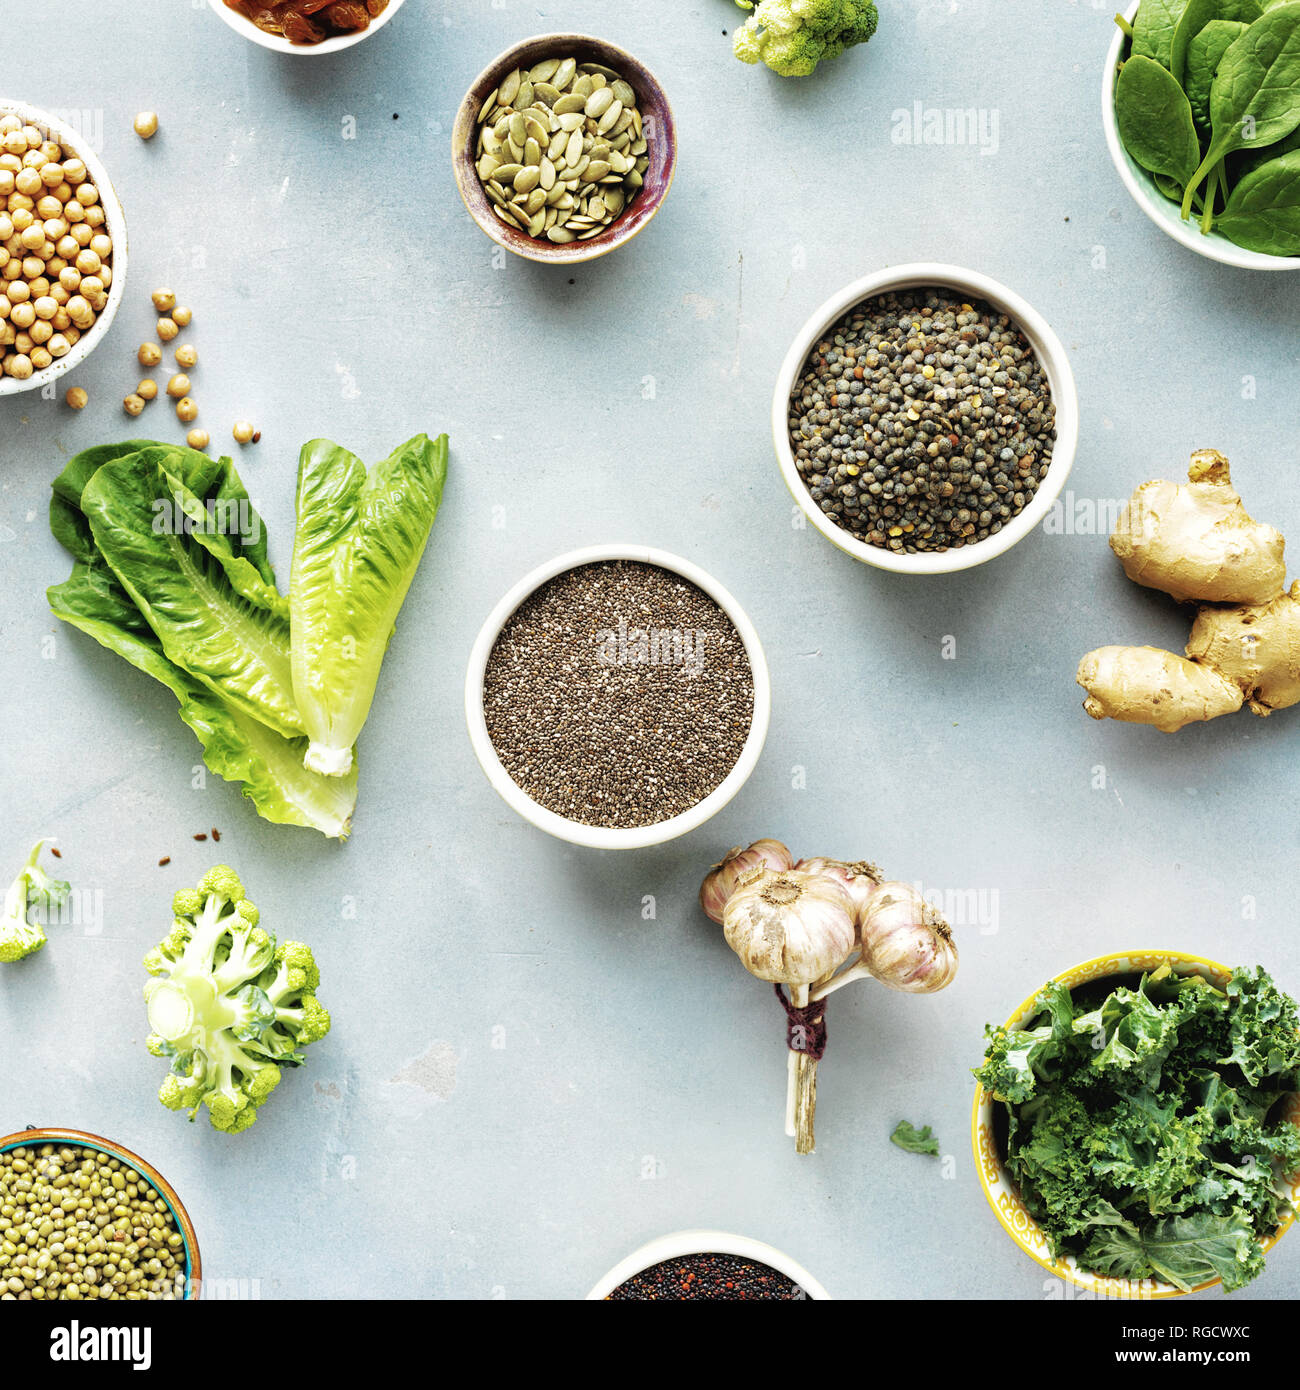 Set raw seeds, cereals, beans, superfoods and green vegetables on blue stone background top view. vegetarian or diet food concept Stock Photo